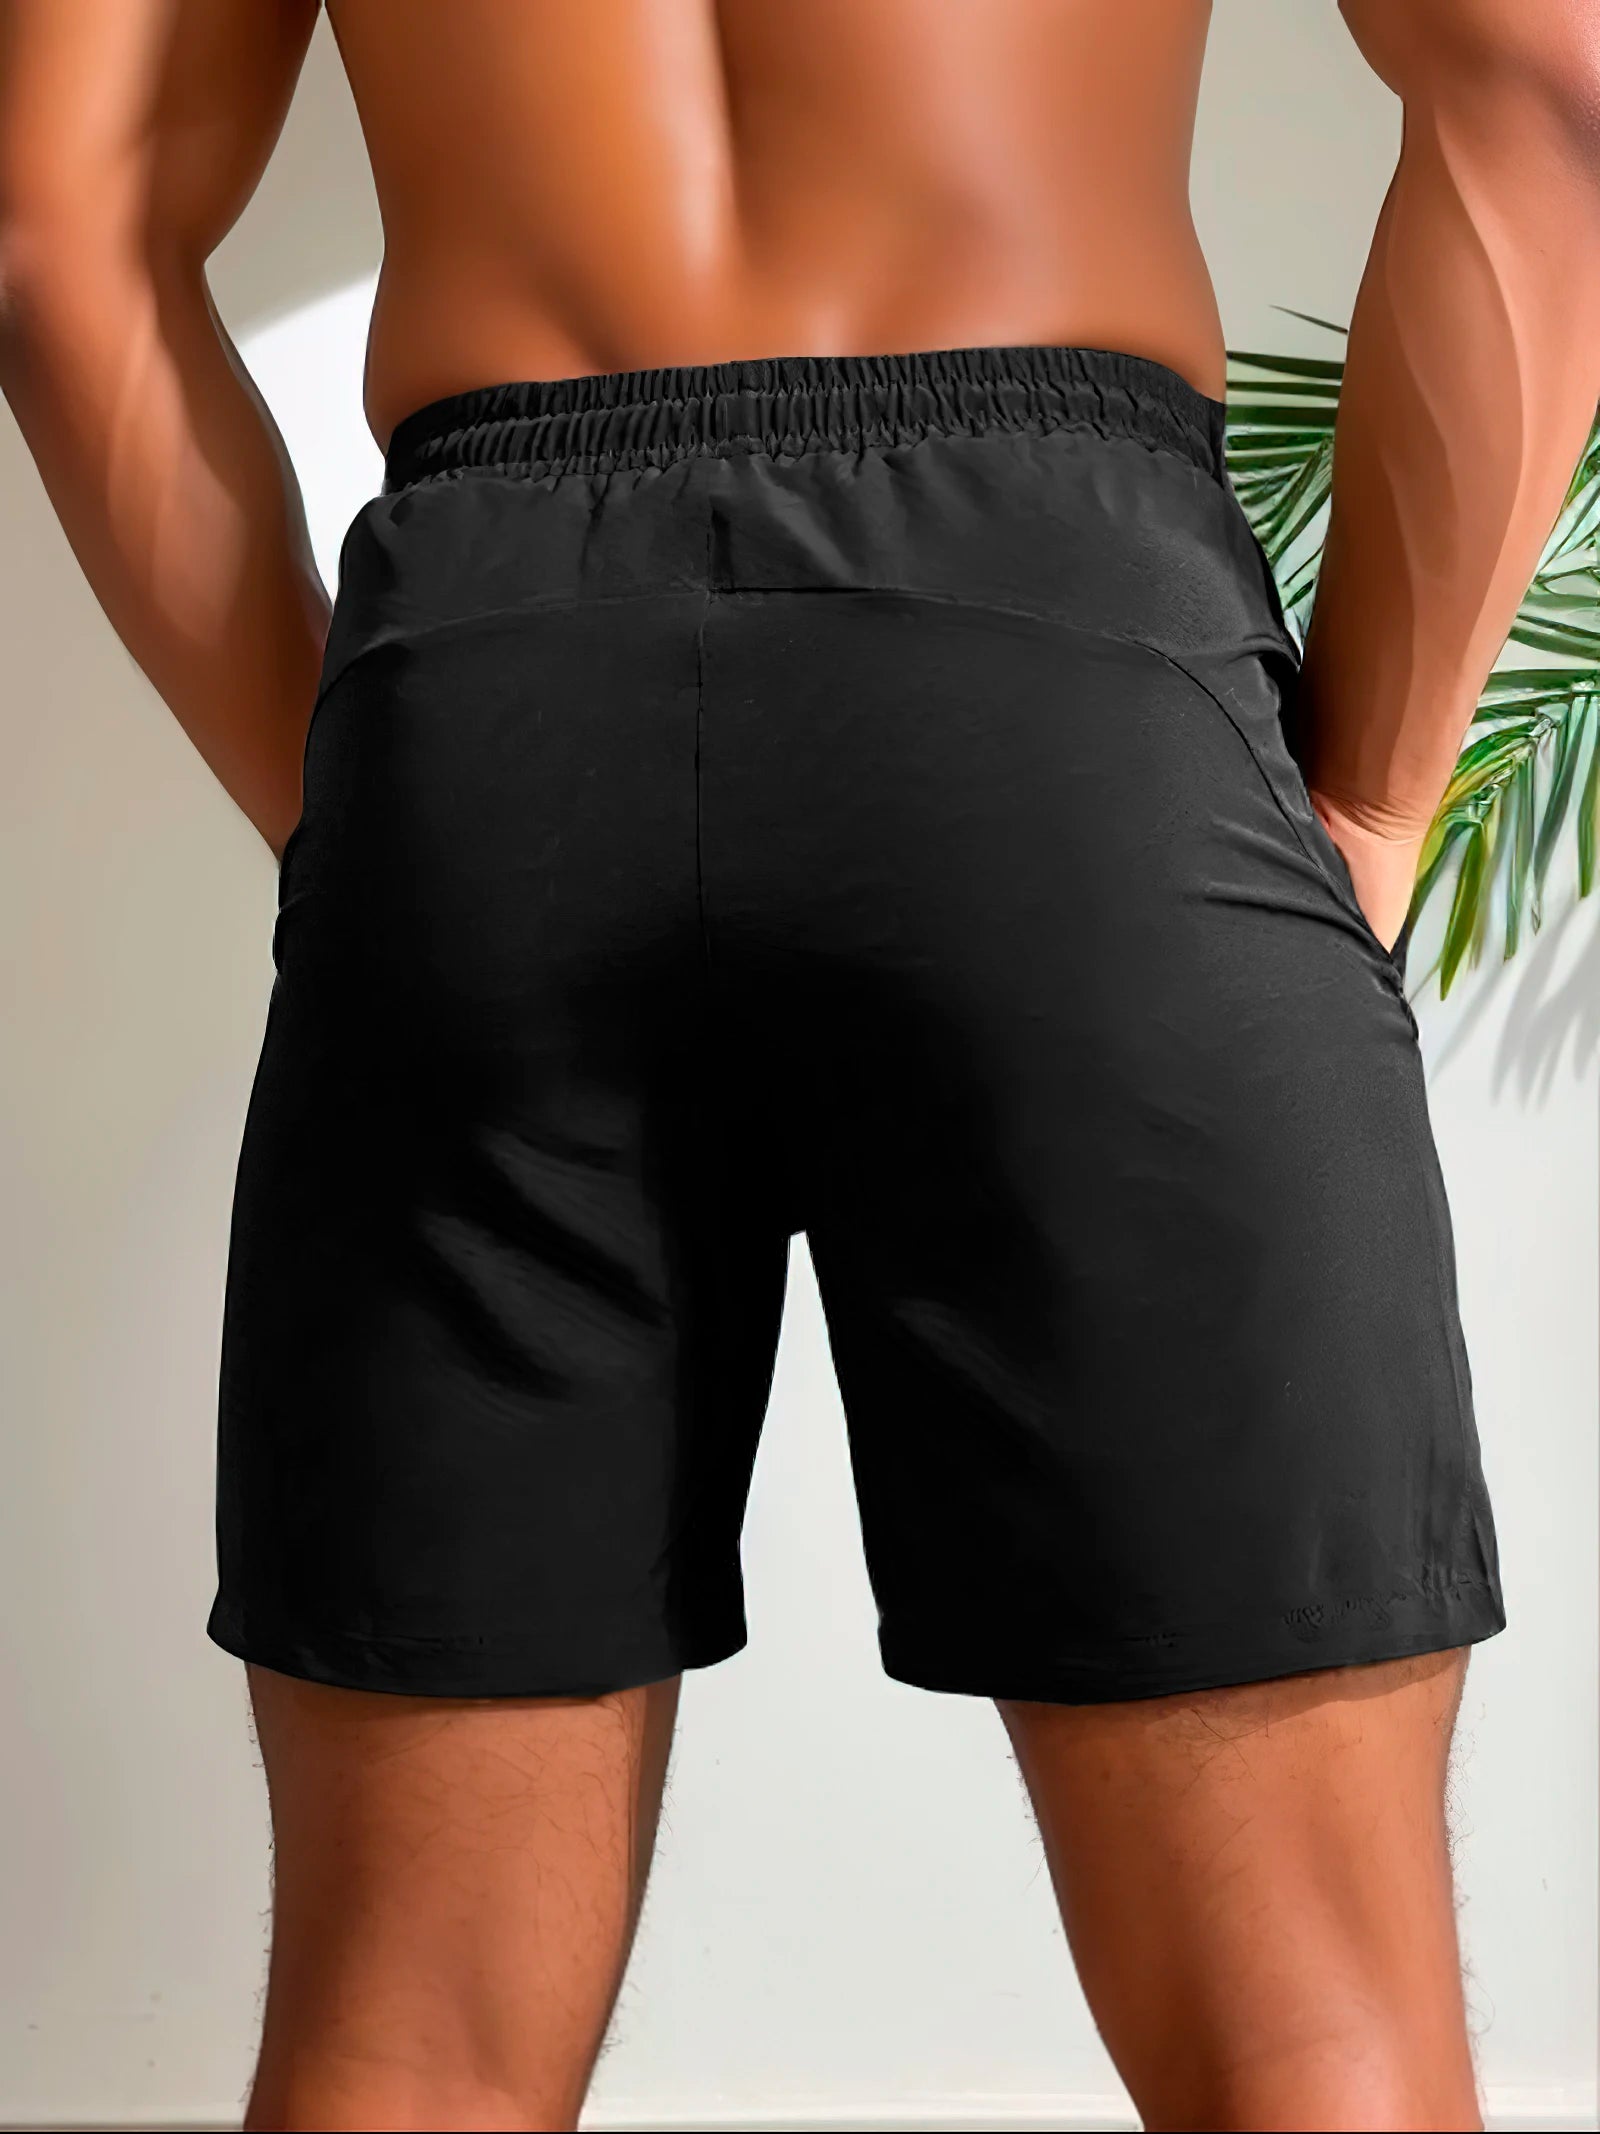 Men's shorts, sports, fitness, cycling, outdoor hiking shorts, running fast dry, cool, breathable, sweat absorbing, and micro el